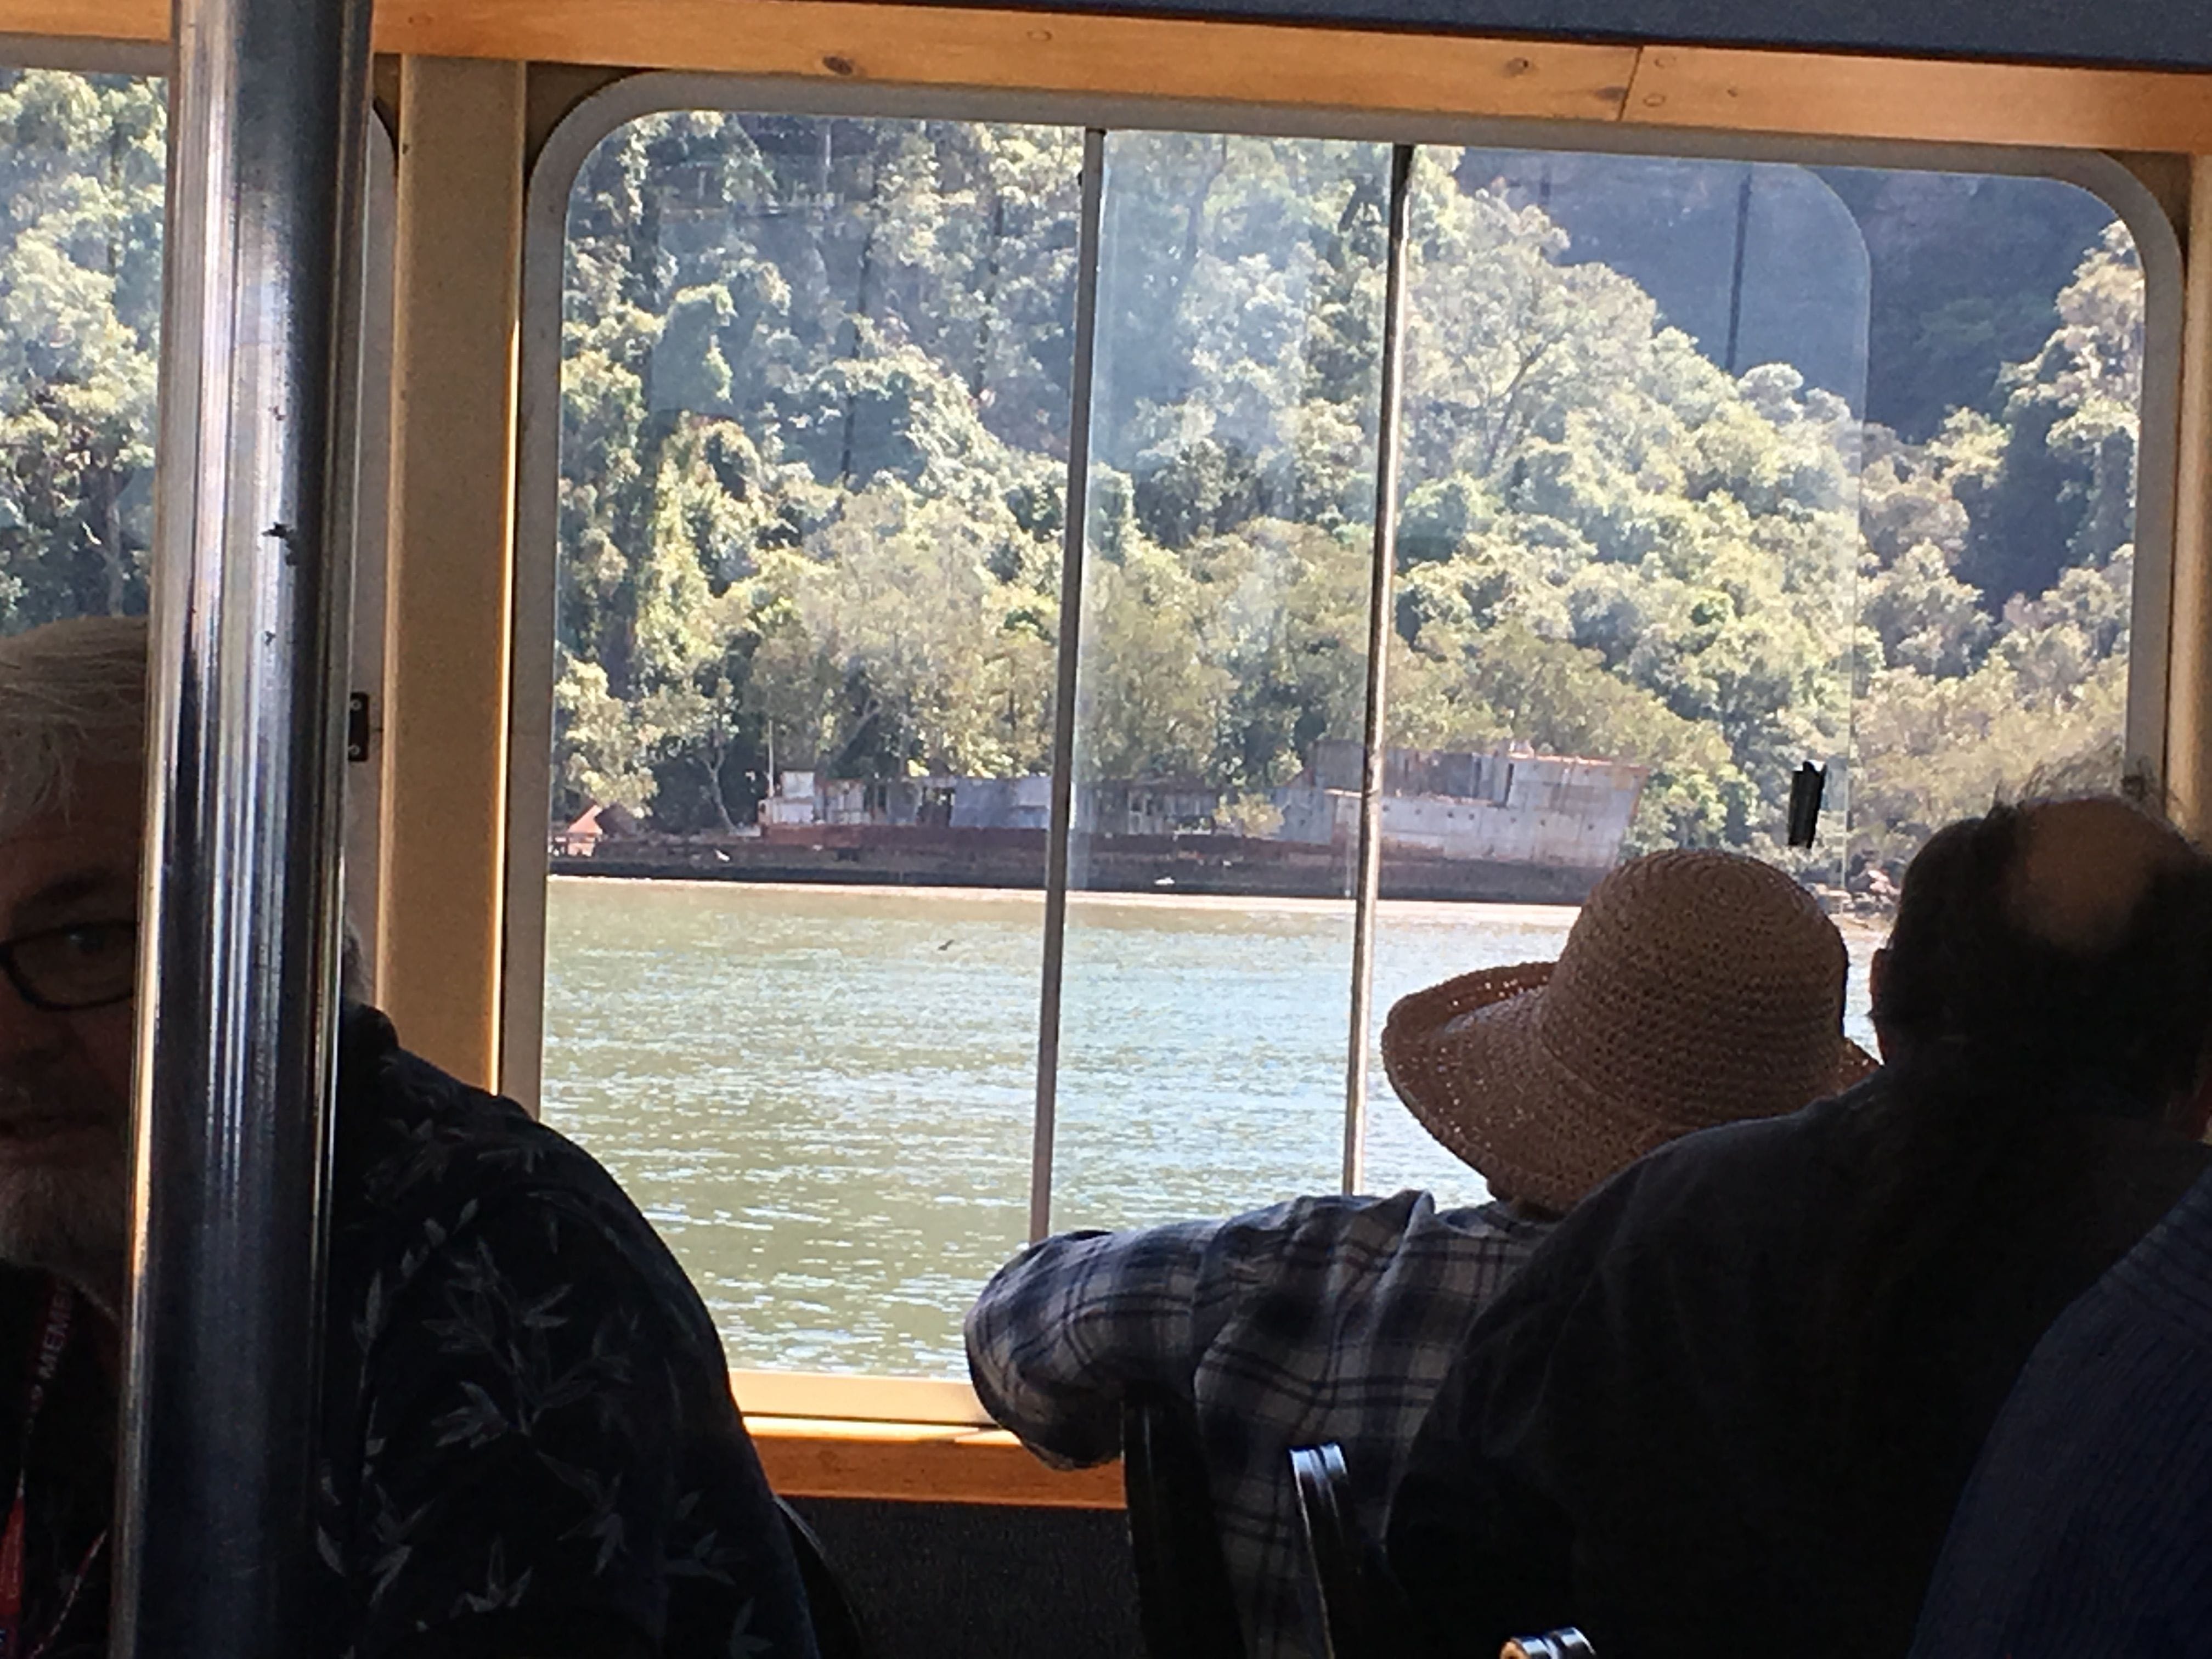 The Riverboat Postman Public Day Tour 25th October 2019 Image -5db366968880e